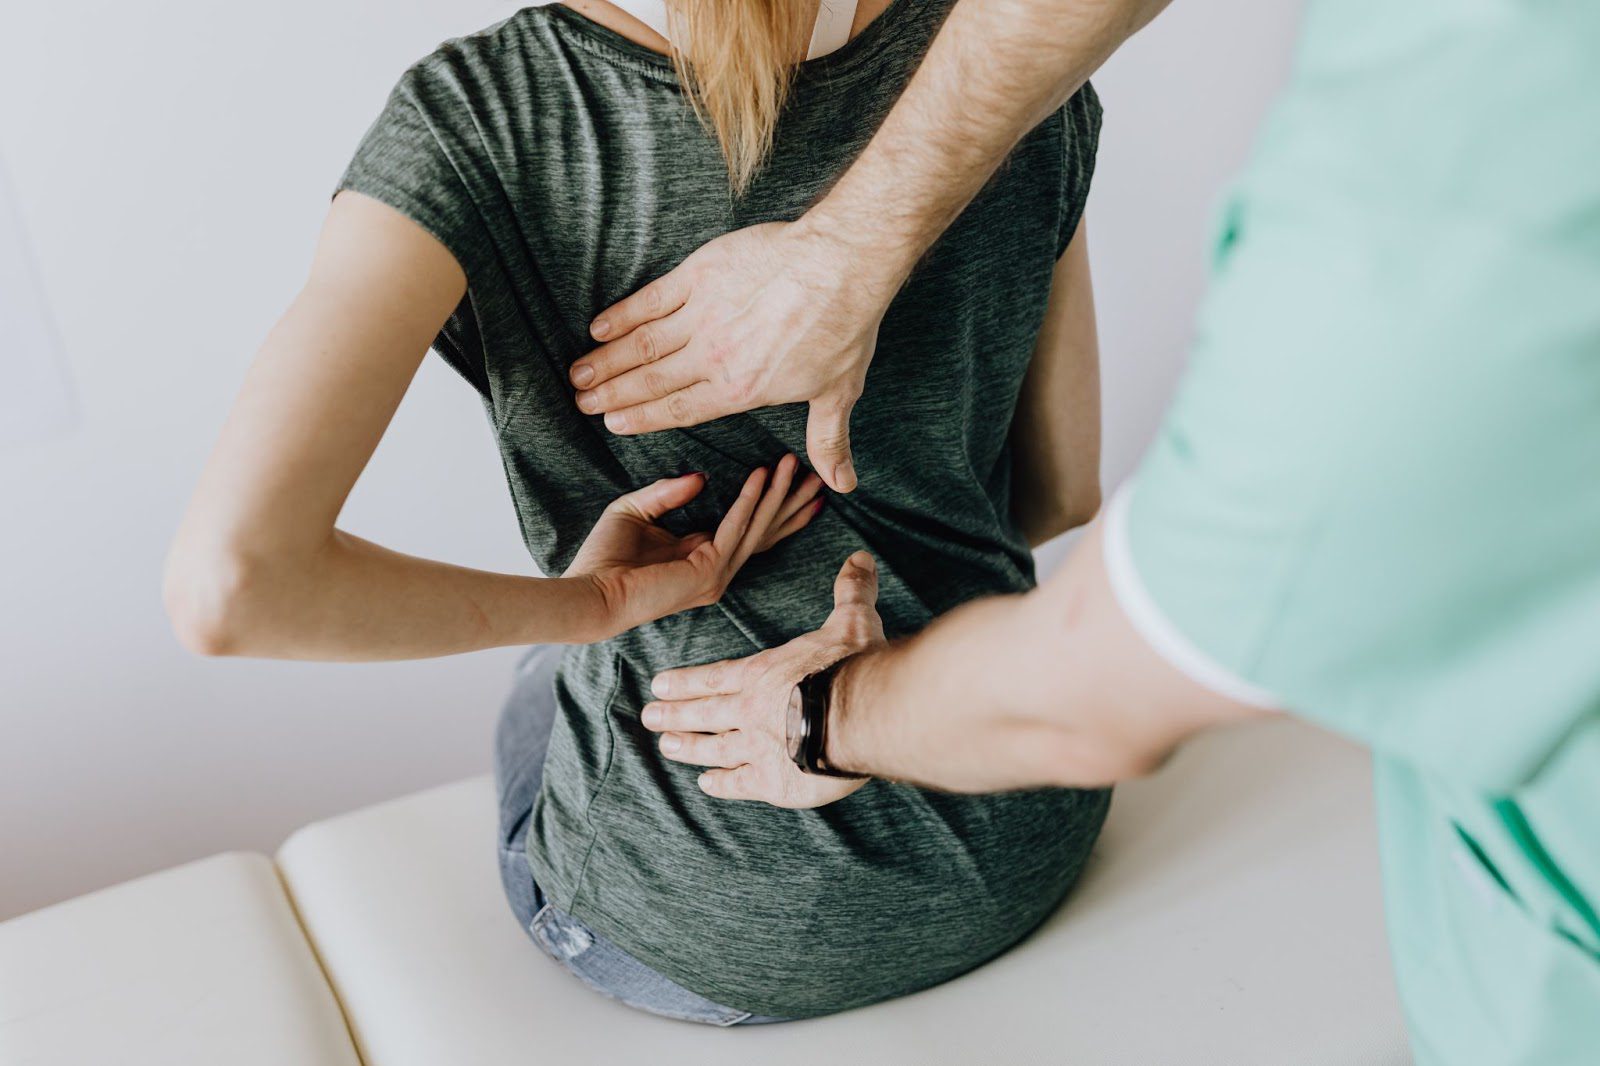 Does Weed Help With Back Pain?